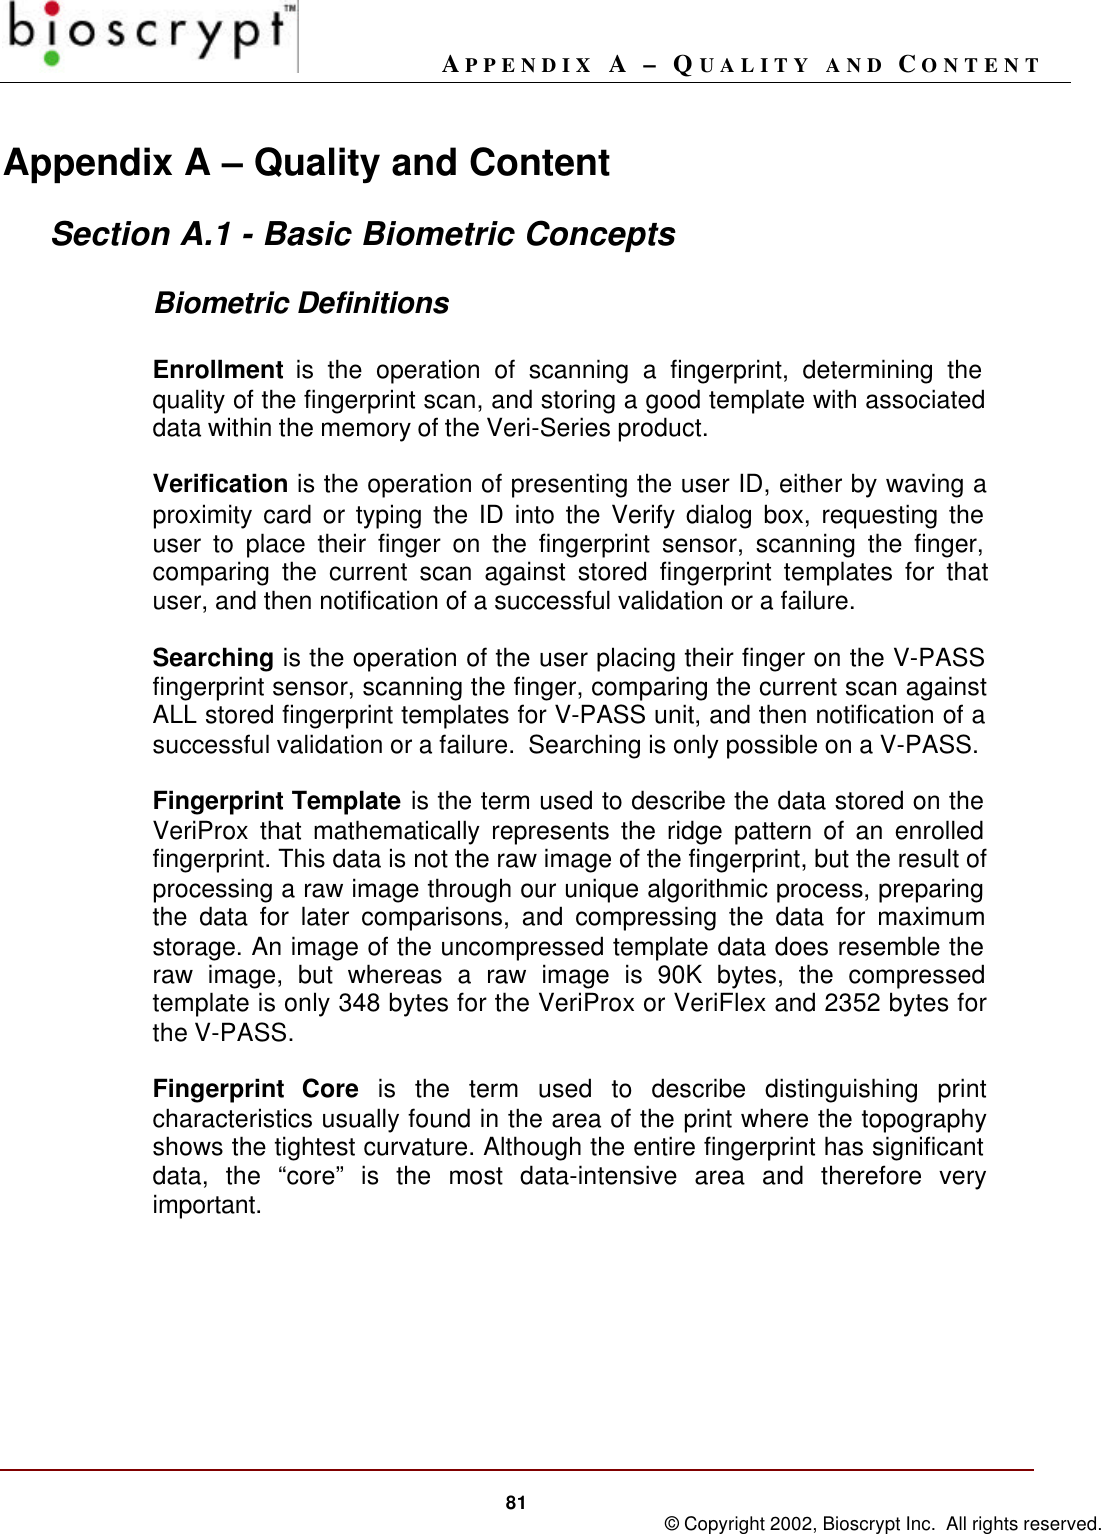 APPENDIX A – QUALITY AND CONTENT81 © Copyright 2002, Bioscrypt Inc.  All rights reserved.Appendix A – Quality and ContentSection A.1 - Basic Biometric ConceptsBiometric DefinitionsEnrollment is the operation of scanning a fingerprint, determining thequality of the fingerprint scan, and storing a good template with associateddata within the memory of the Veri-Series product.Verification is the operation of presenting the user ID, either by waving aproximity card or typing the ID into the Verify dialog box, requesting theuser to place their finger on the fingerprint sensor, scanning the finger,comparing the current scan against stored fingerprint templates for thatuser, and then notification of a successful validation or a failure.Searching is the operation of the user placing their finger on the V-PASSfingerprint sensor, scanning the finger, comparing the current scan againstALL stored fingerprint templates for V-PASS unit, and then notification of asuccessful validation or a failure.  Searching is only possible on a V-PASS.Fingerprint Template is the term used to describe the data stored on theVeriProx that mathematically represents the ridge pattern of an enrolledfingerprint. This data is not the raw image of the fingerprint, but the result ofprocessing a raw image through our unique algorithmic process, preparingthe data for later comparisons, and compressing the data for maximumstorage. An image of the uncompressed template data does resemble theraw image, but whereas a raw image is 90K bytes, the compressedtemplate is only 348 bytes for the VeriProx or VeriFlex and 2352 bytes forthe V-PASS.Fingerprint Core is the term used to describe distinguishing printcharacteristics usually found in the area of the print where the topographyshows the tightest curvature. Although the entire fingerprint has significantdata, the “core” is the most data-intensive area and therefore veryimportant.